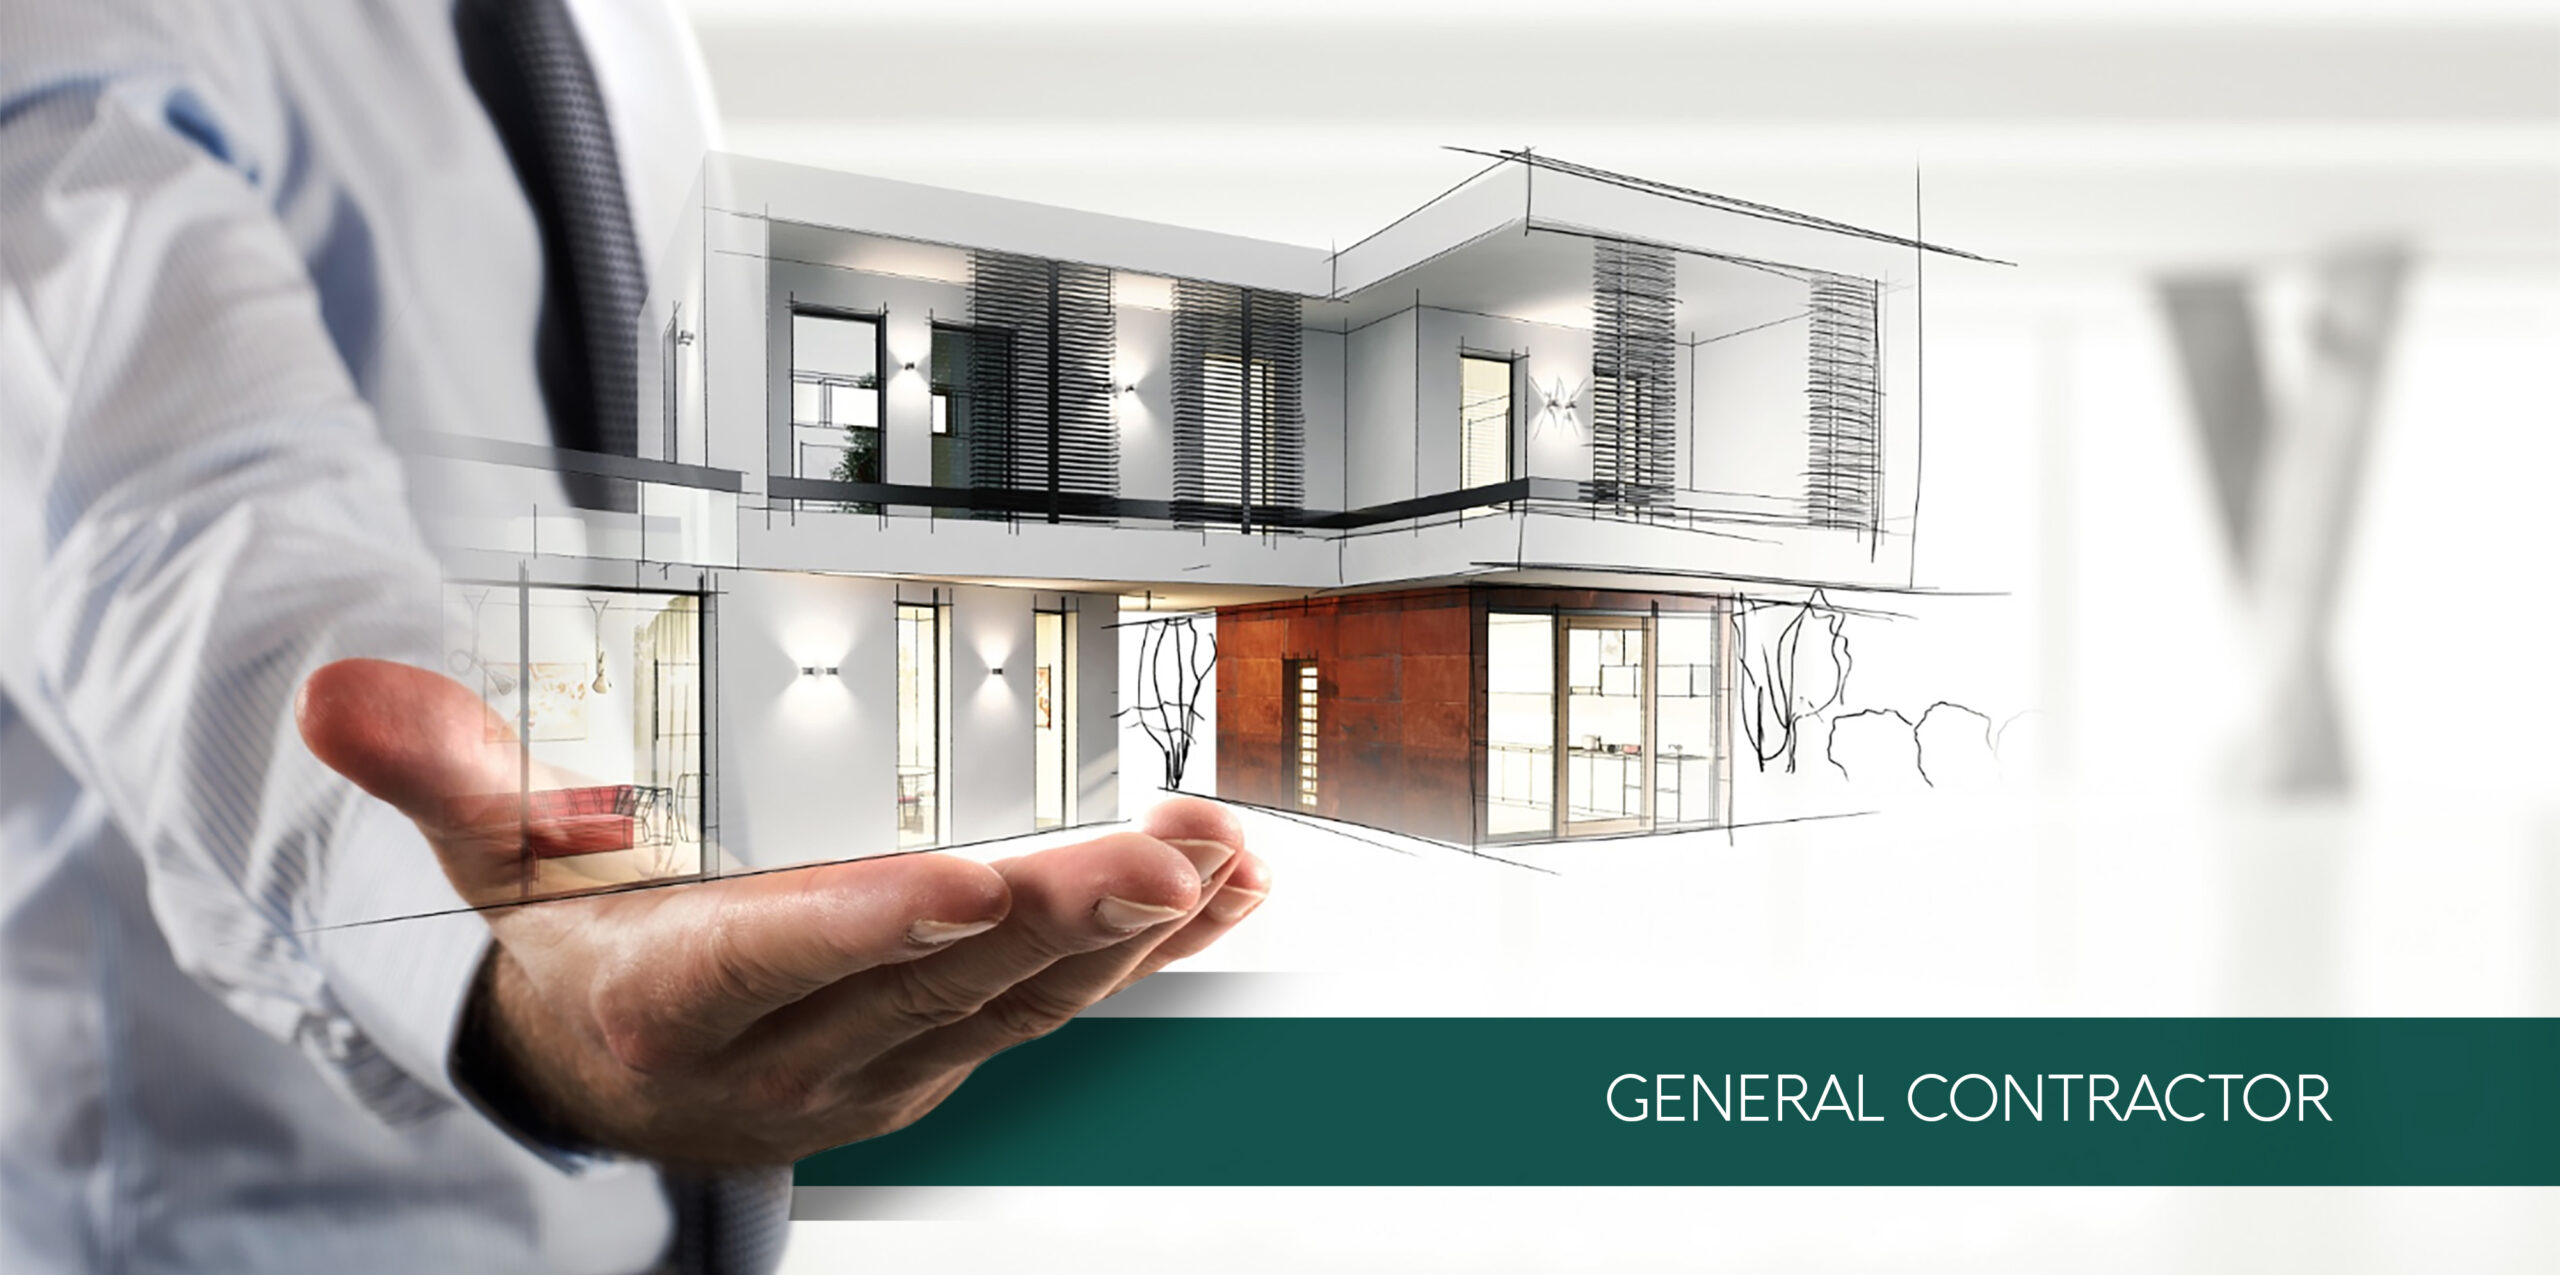 General Contractor Project & Management